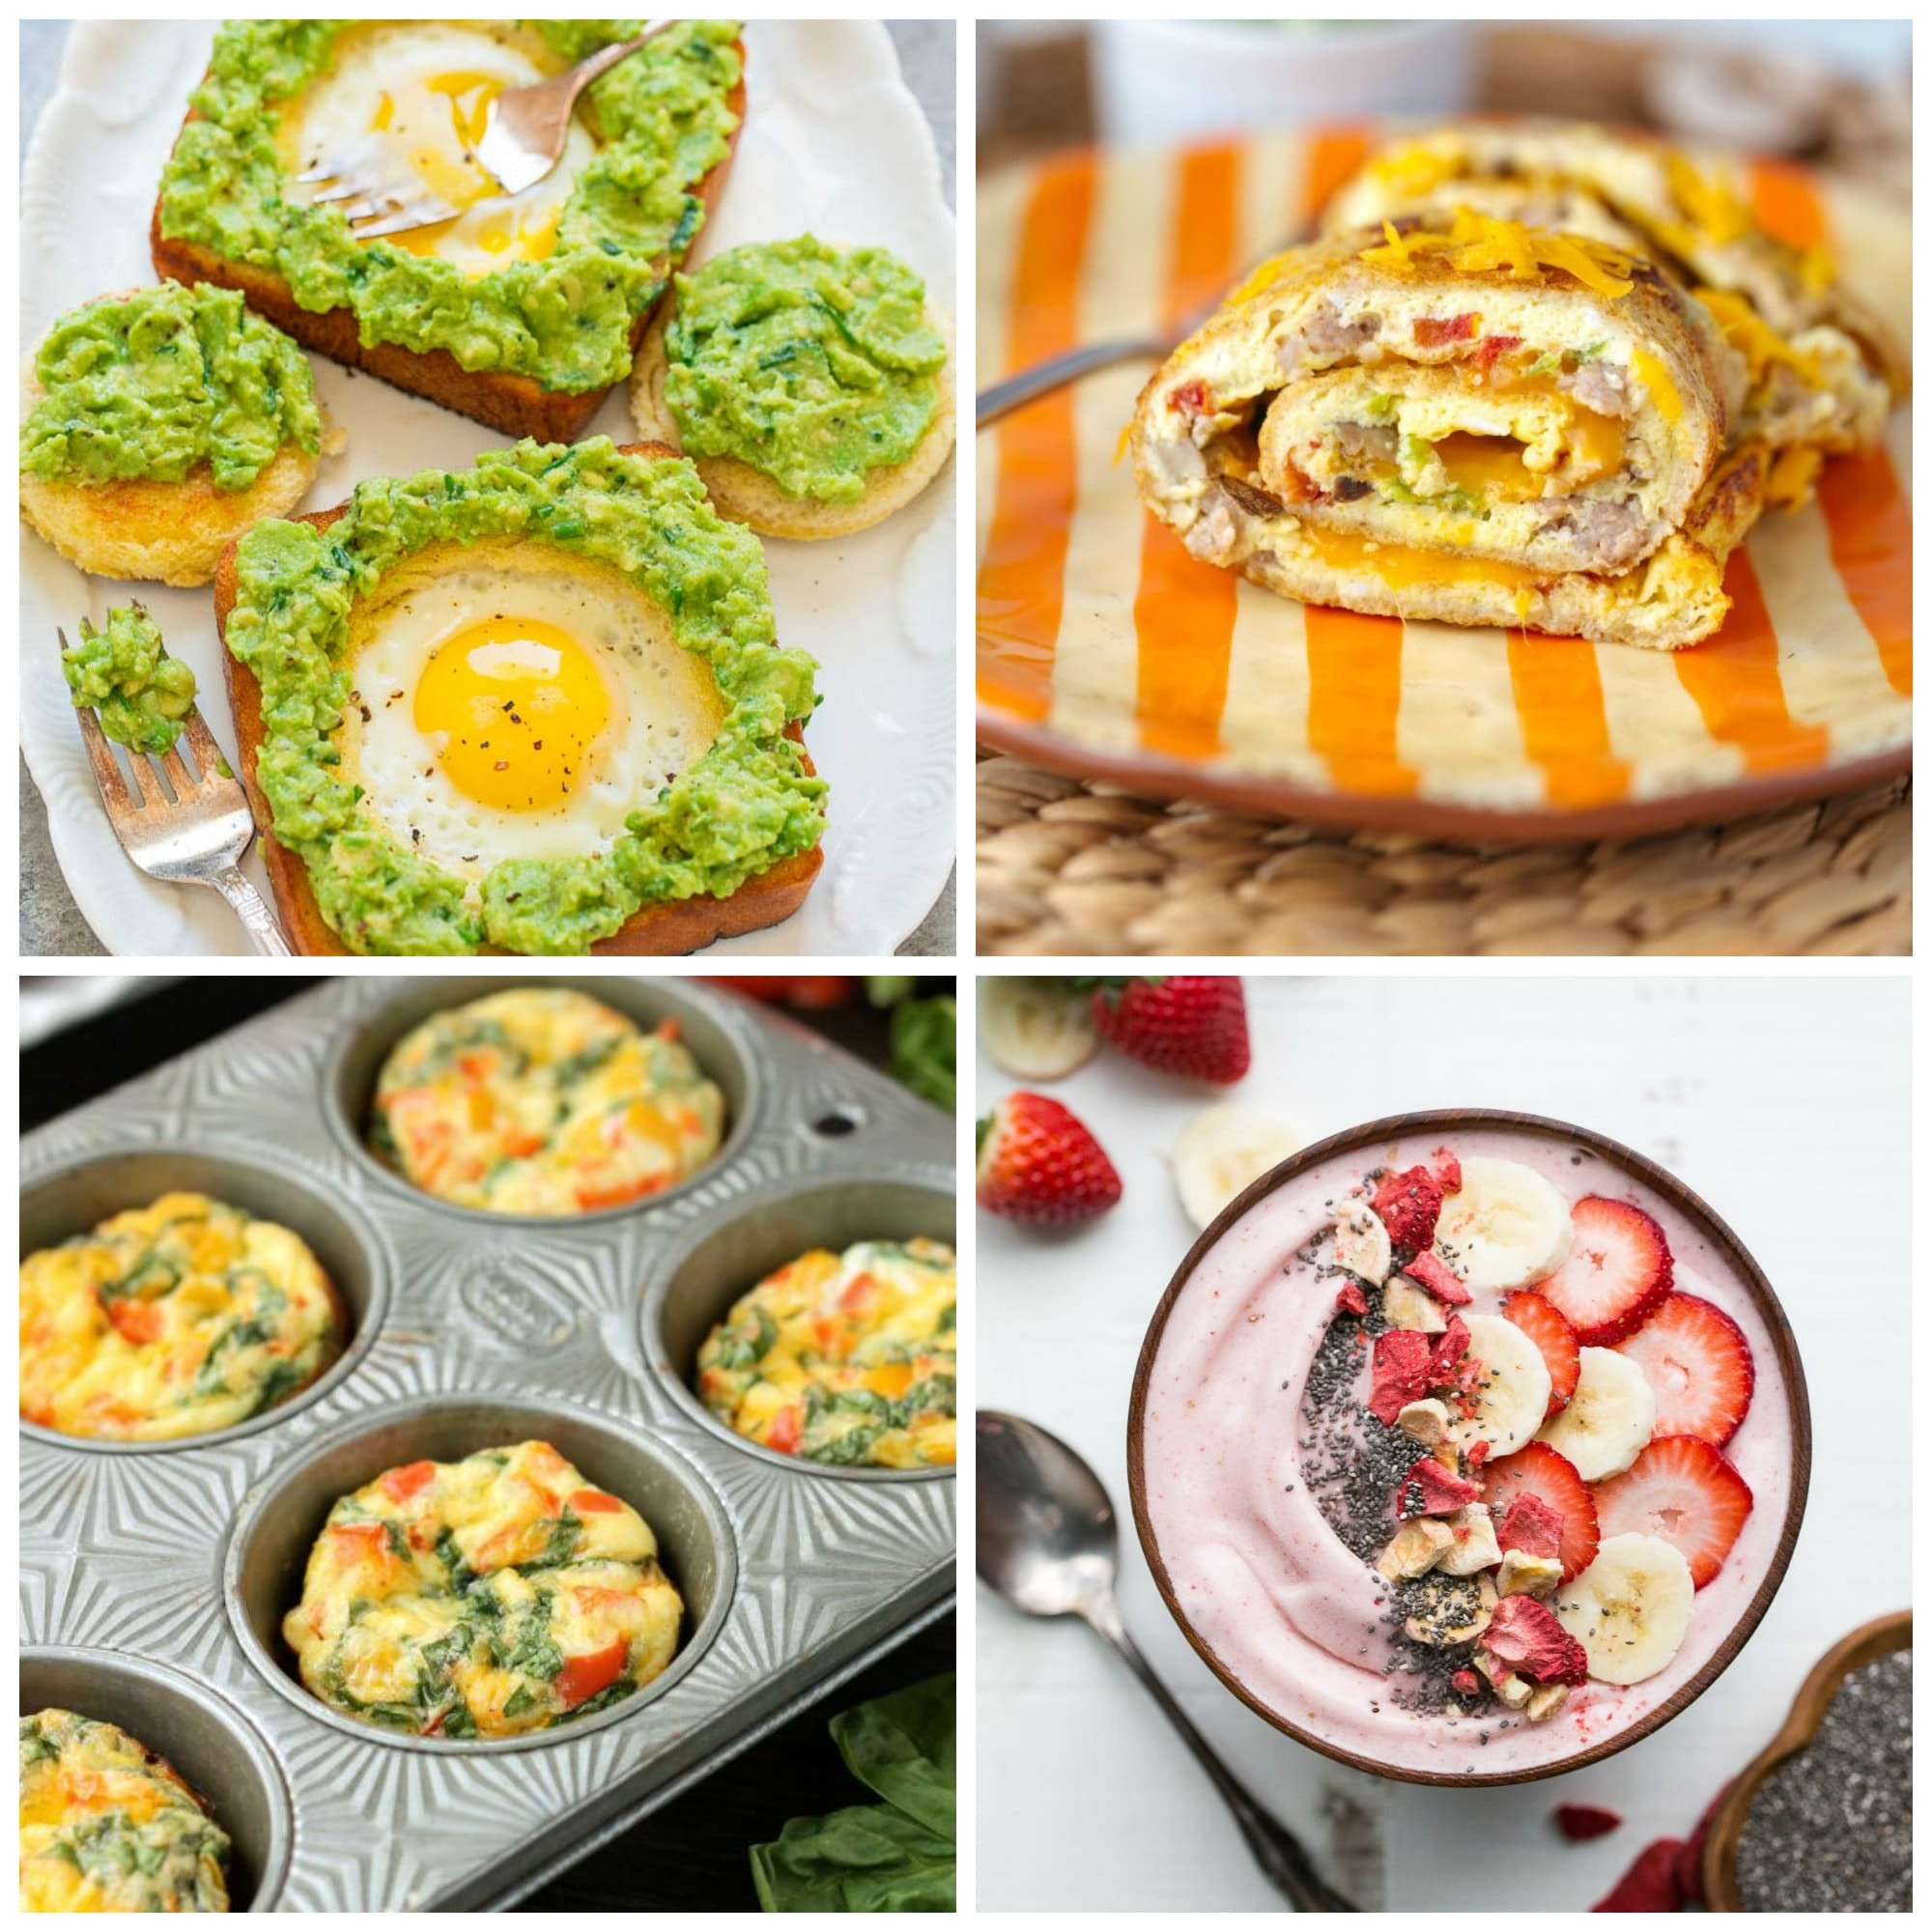 Healthy Fast Breakfast Awesome 12 Super Quick Healthy Breakfast Ideas In A Hurry Super